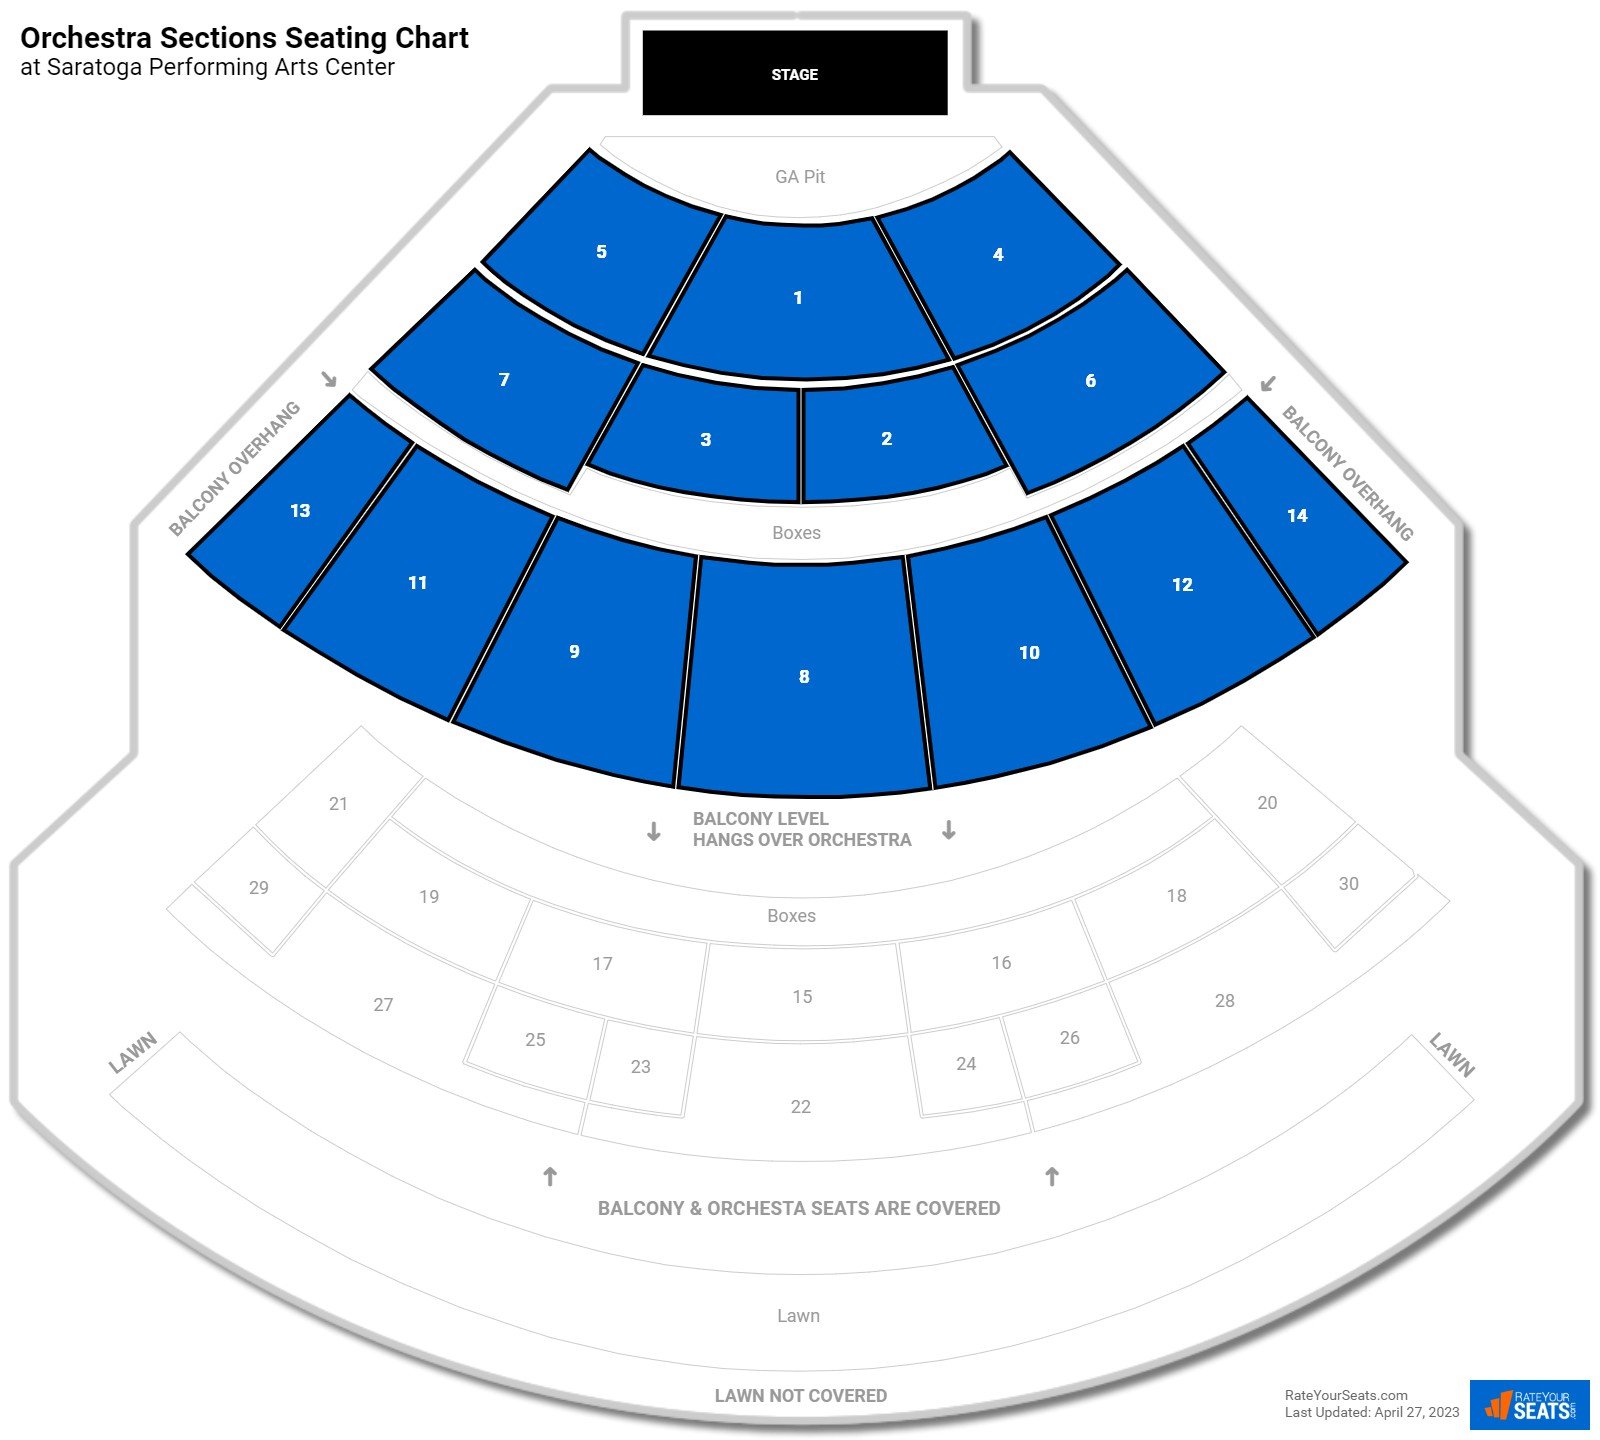 Concert Orchestra Sections Seating Chart at Saratoga Performing Arts Center